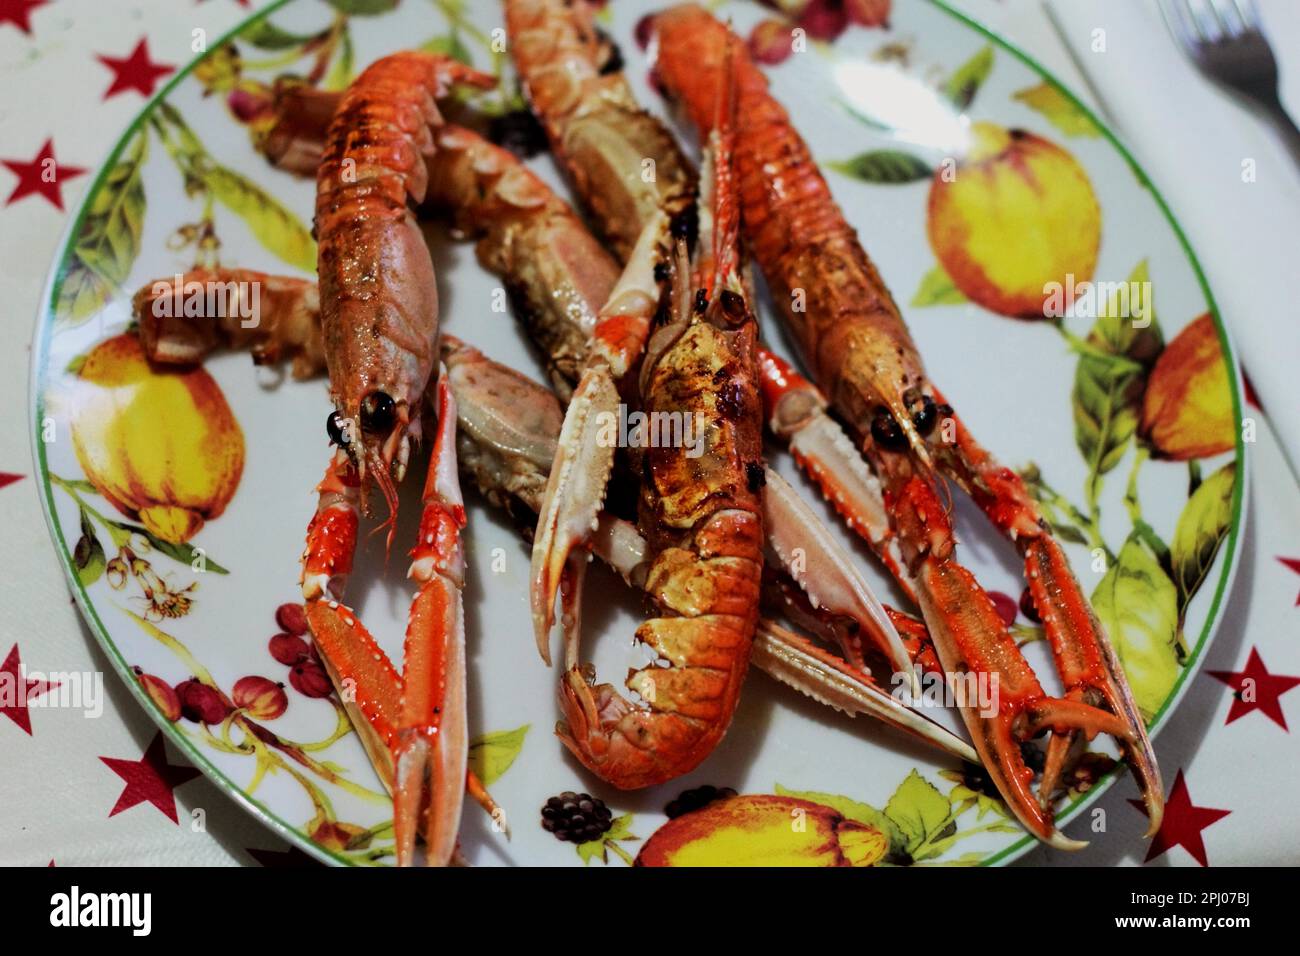 Scampi (Nephrops norvegicus) cooked in a cast iron pan. Fresh shellfish Stock Photo